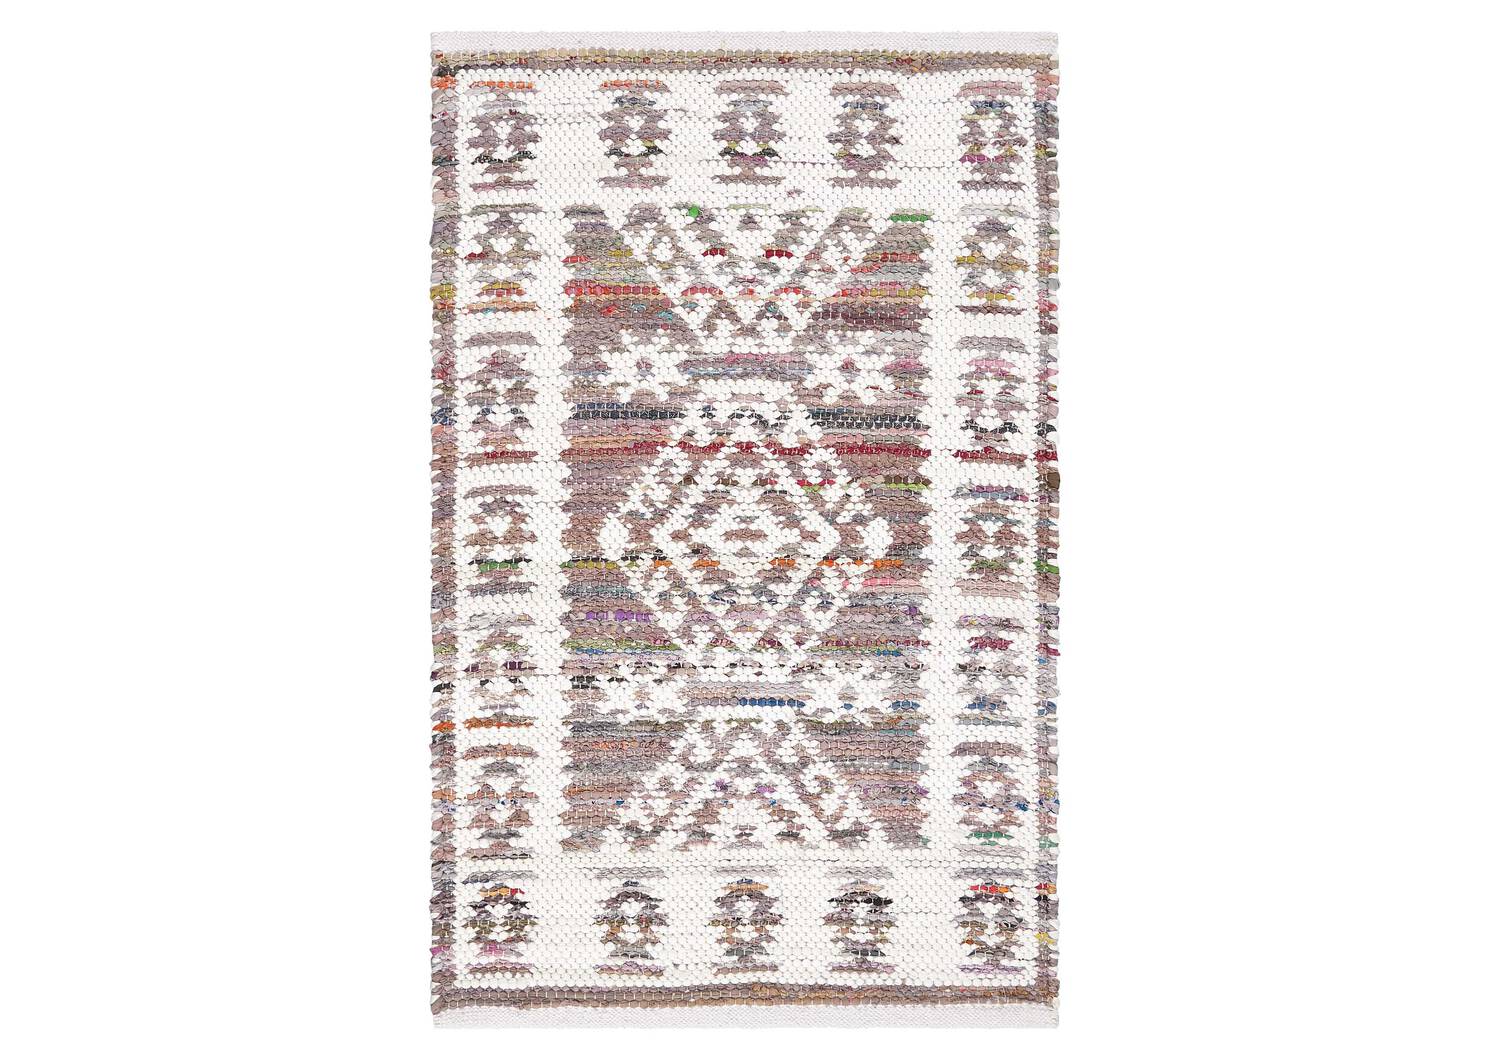 Marchant Accent Rug - Blush/White